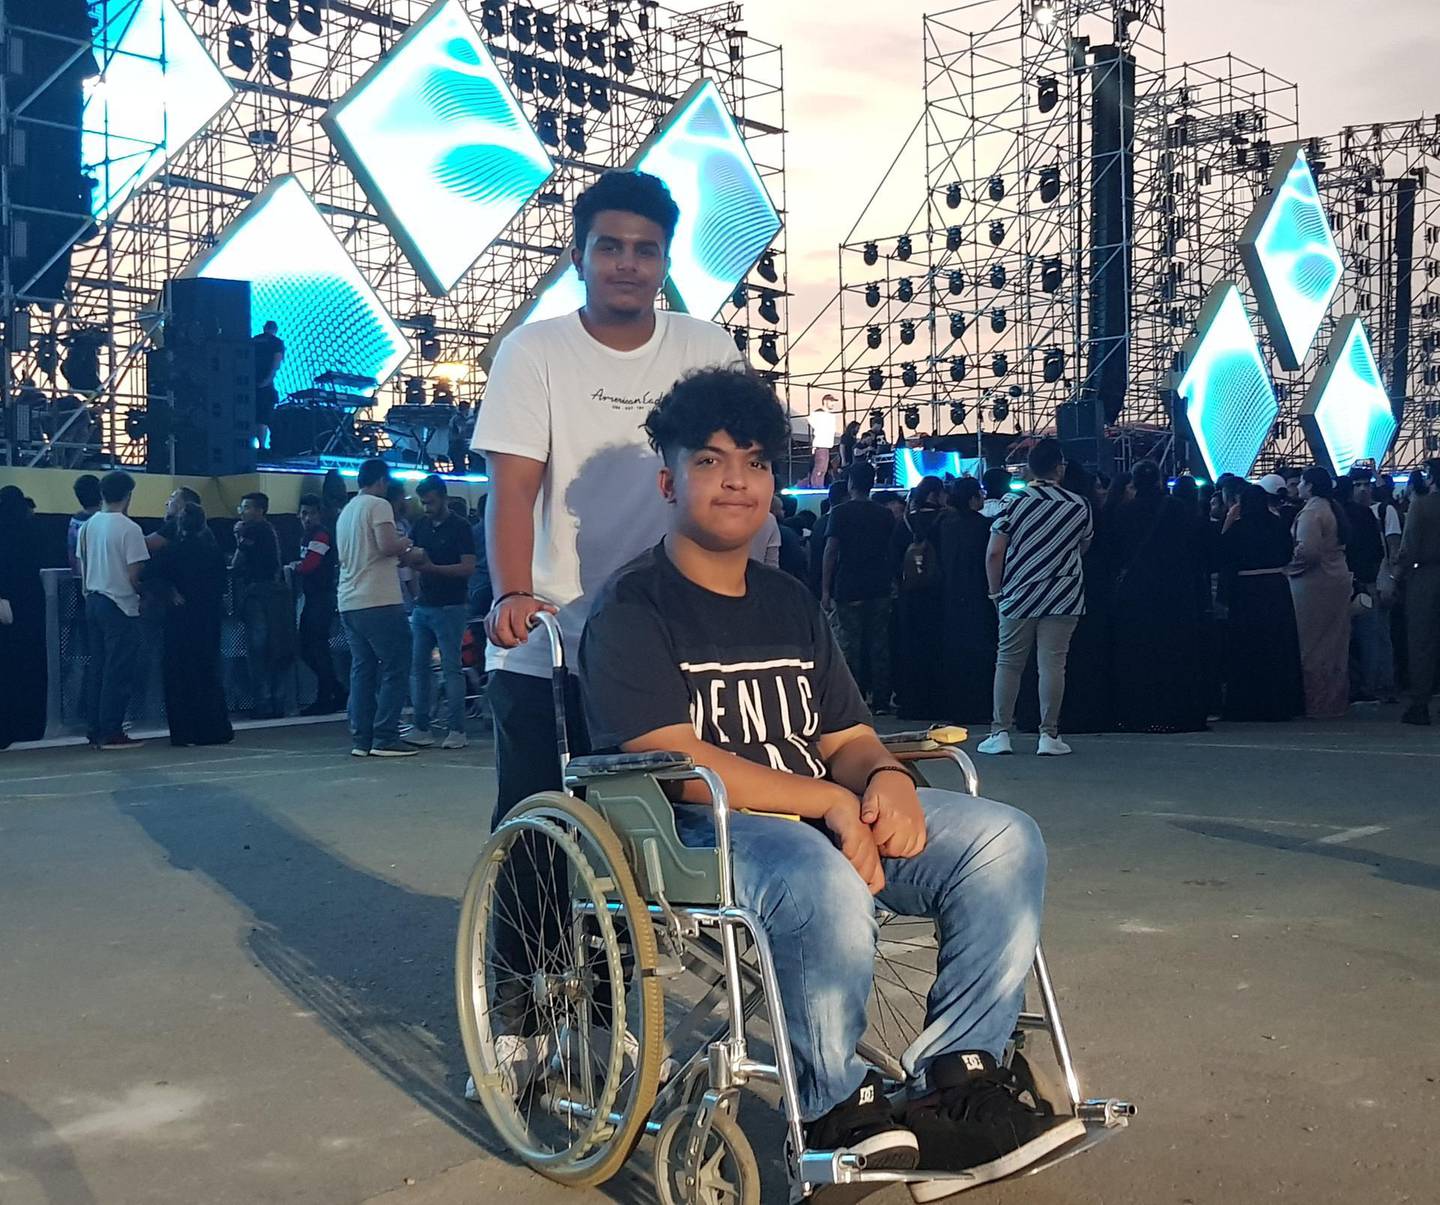 Mohammed Shaheen says future events in Jeddah need to be more disability friendly. Picture by Saeed Saeed.